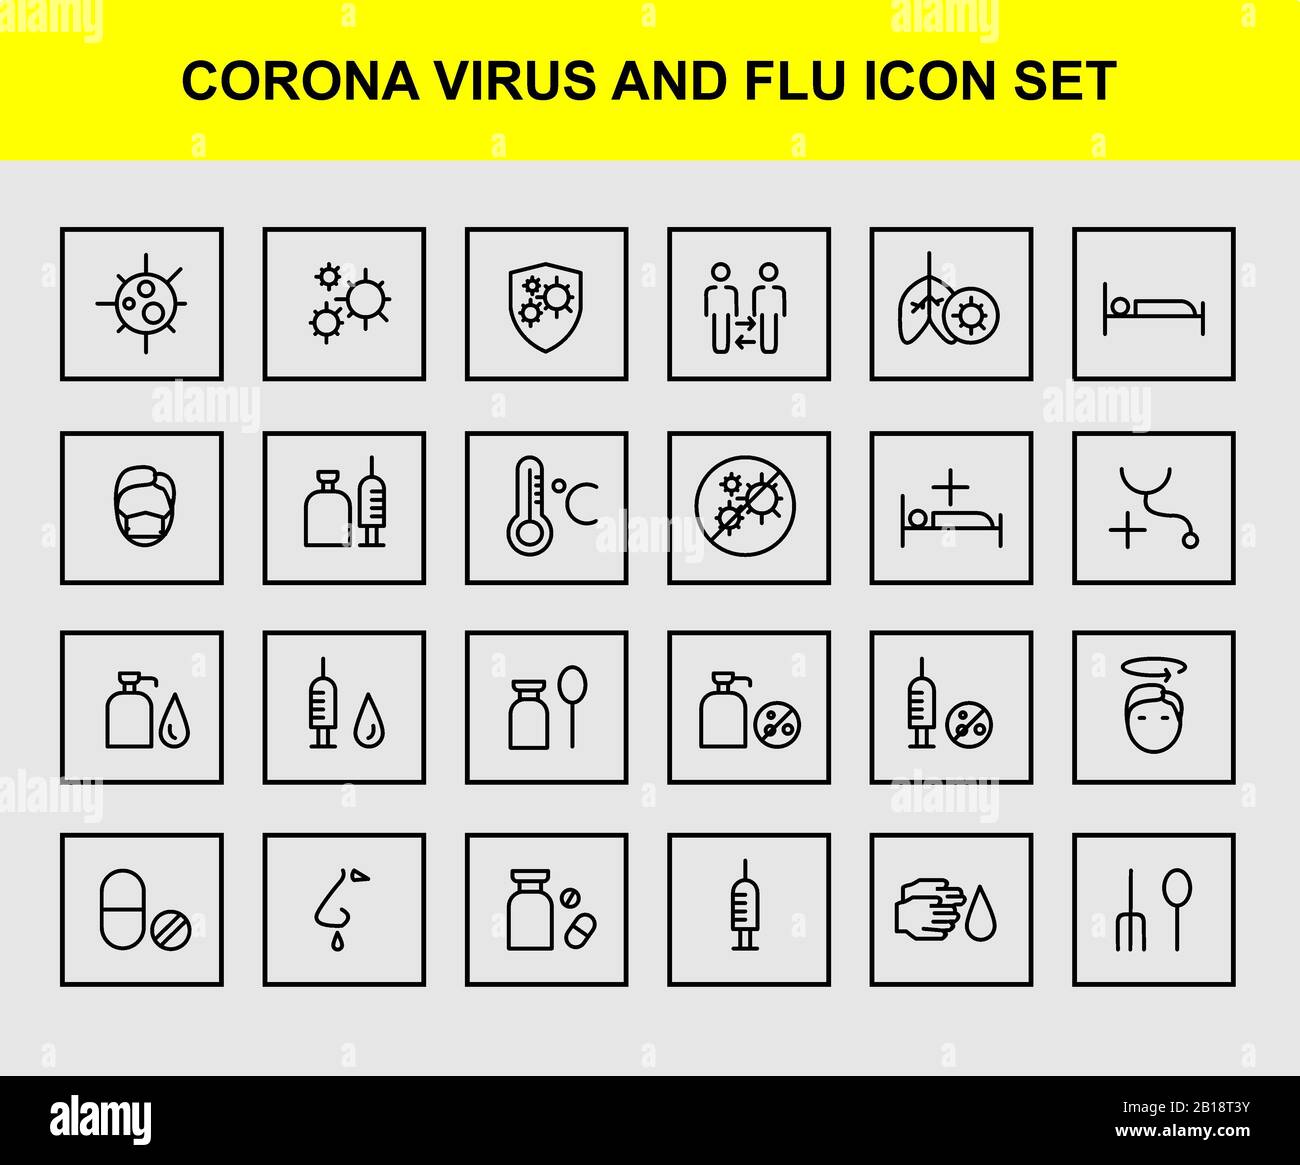 Corona virus and flu icon set with outline style.Editable vector. Isolated. Stock Photo